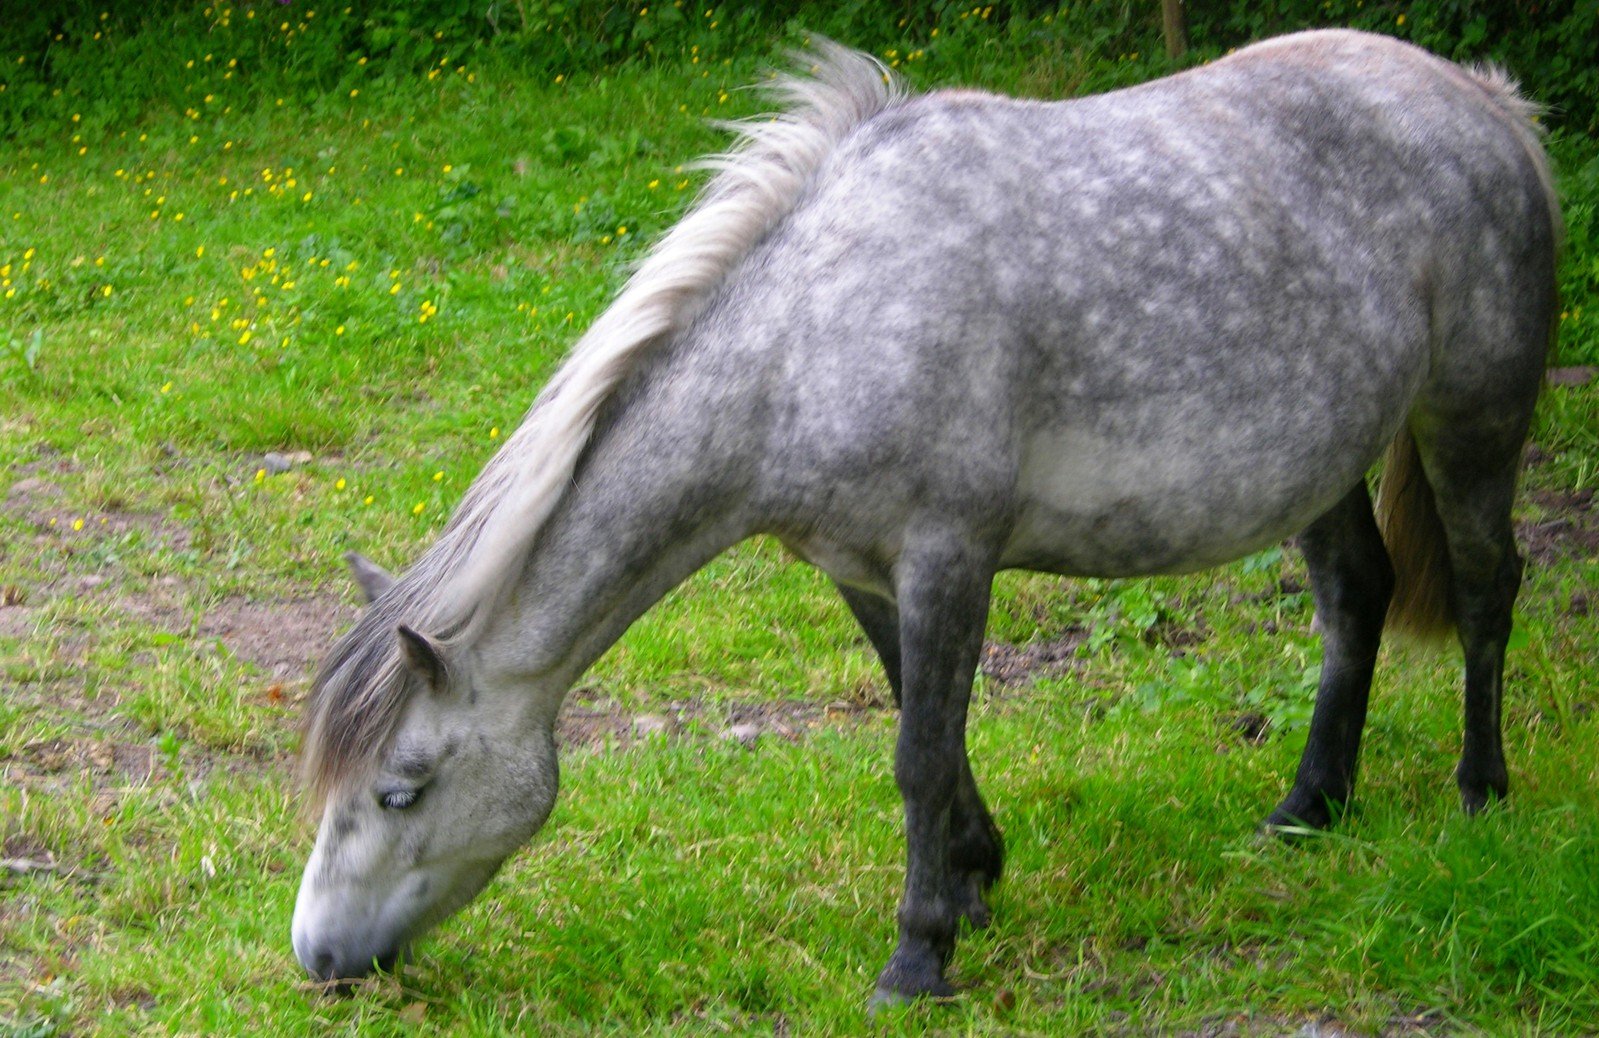 a small gray horse eating grass in front of trees